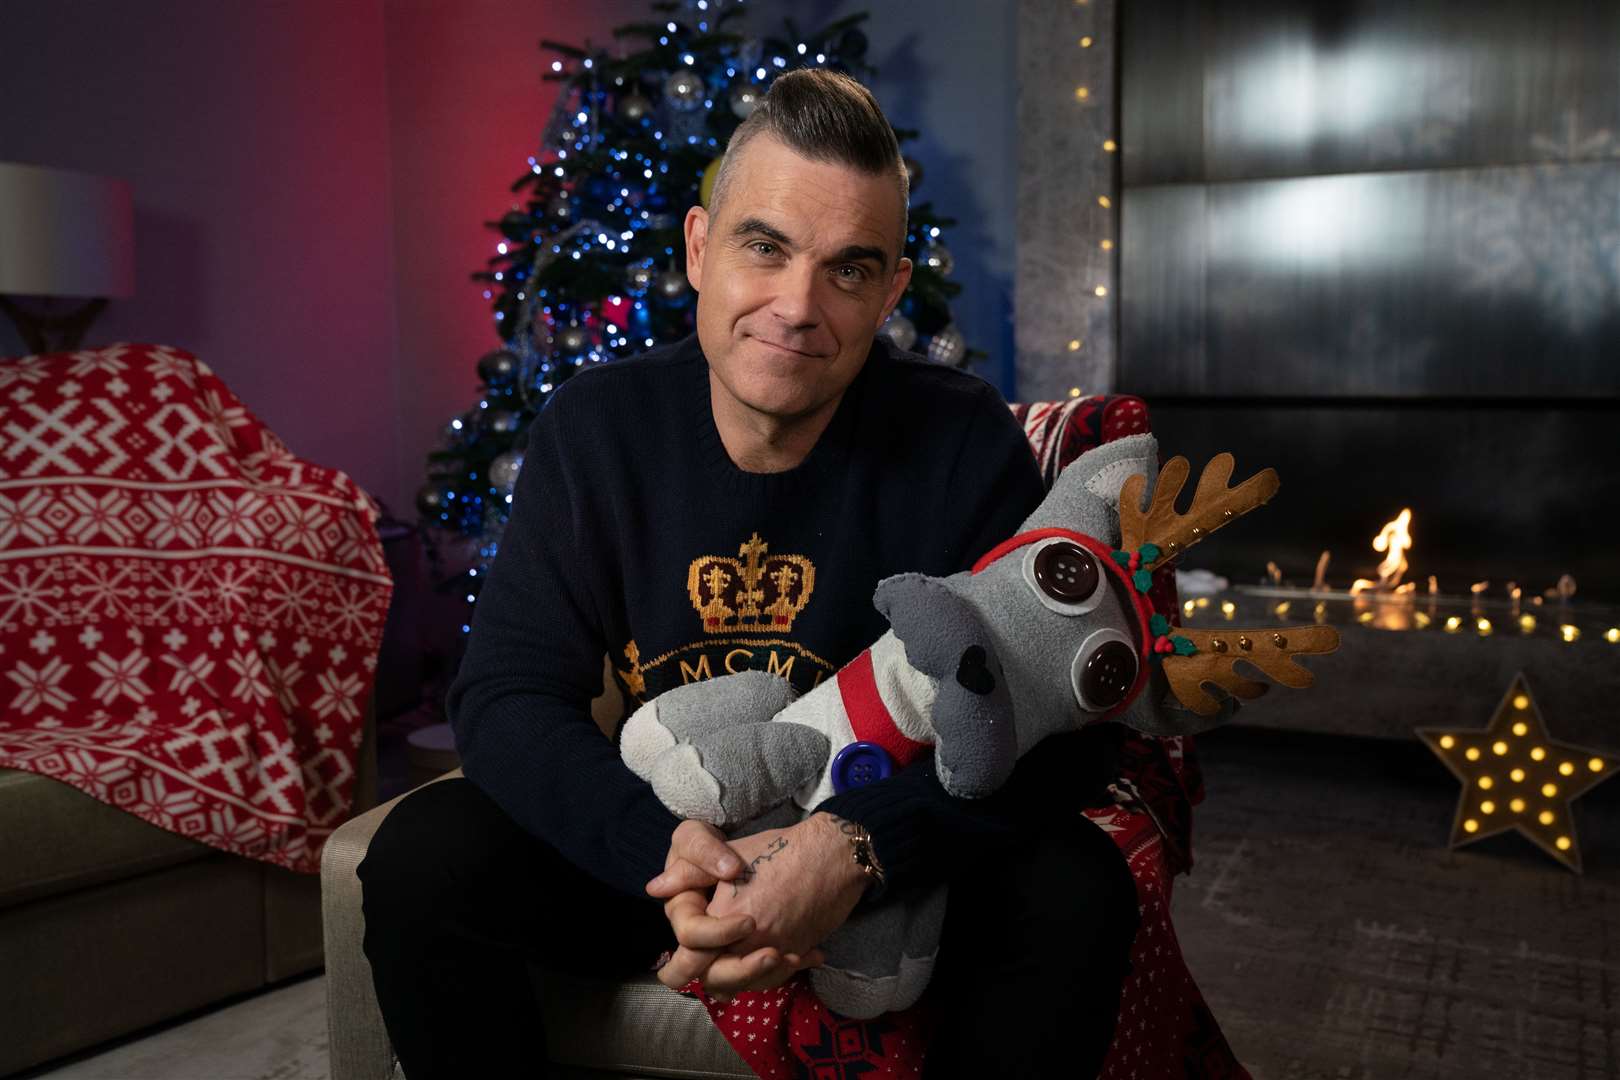 Robbie to read a Cbeebies Christmas bedtime story on Friday, December 20